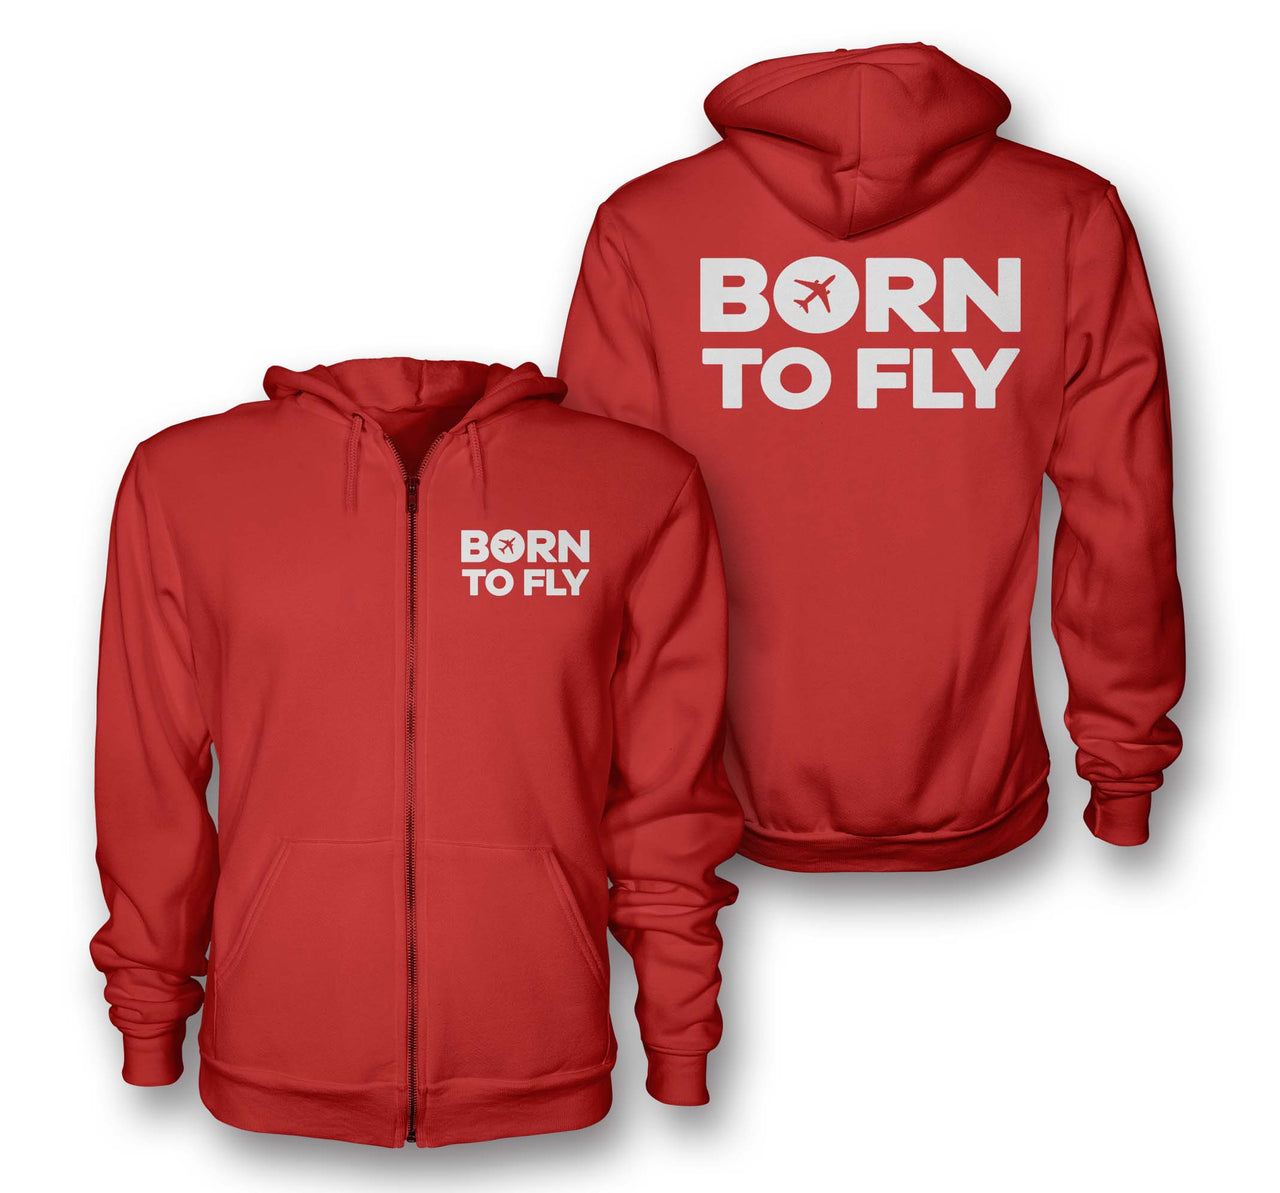 Born To Fly Special Designed Zipped Hoodies